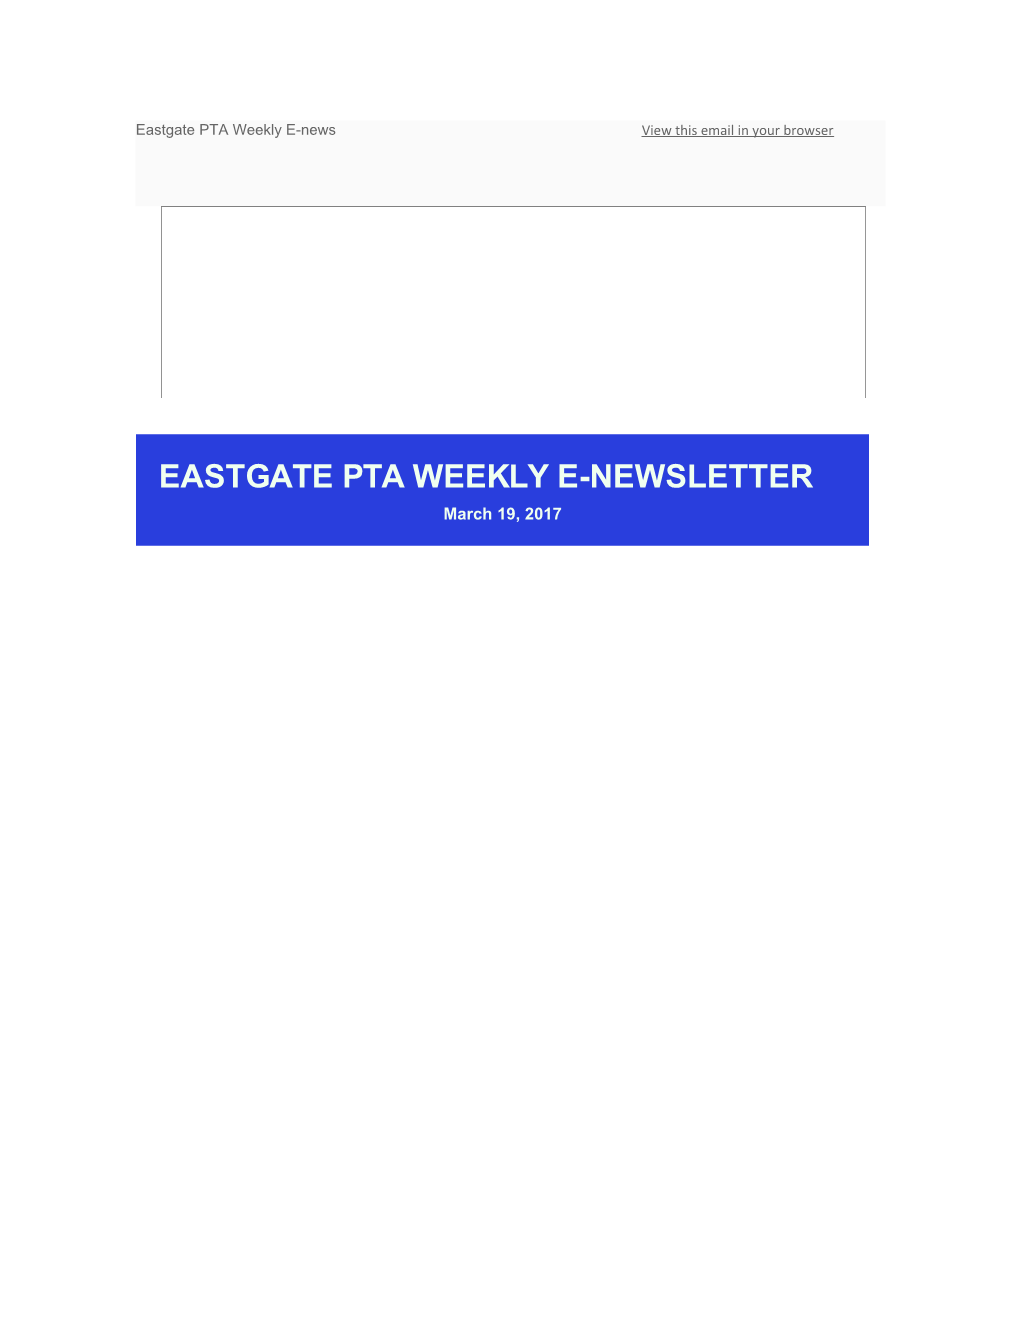 Eastgate Pta Weekly E-Newsletter